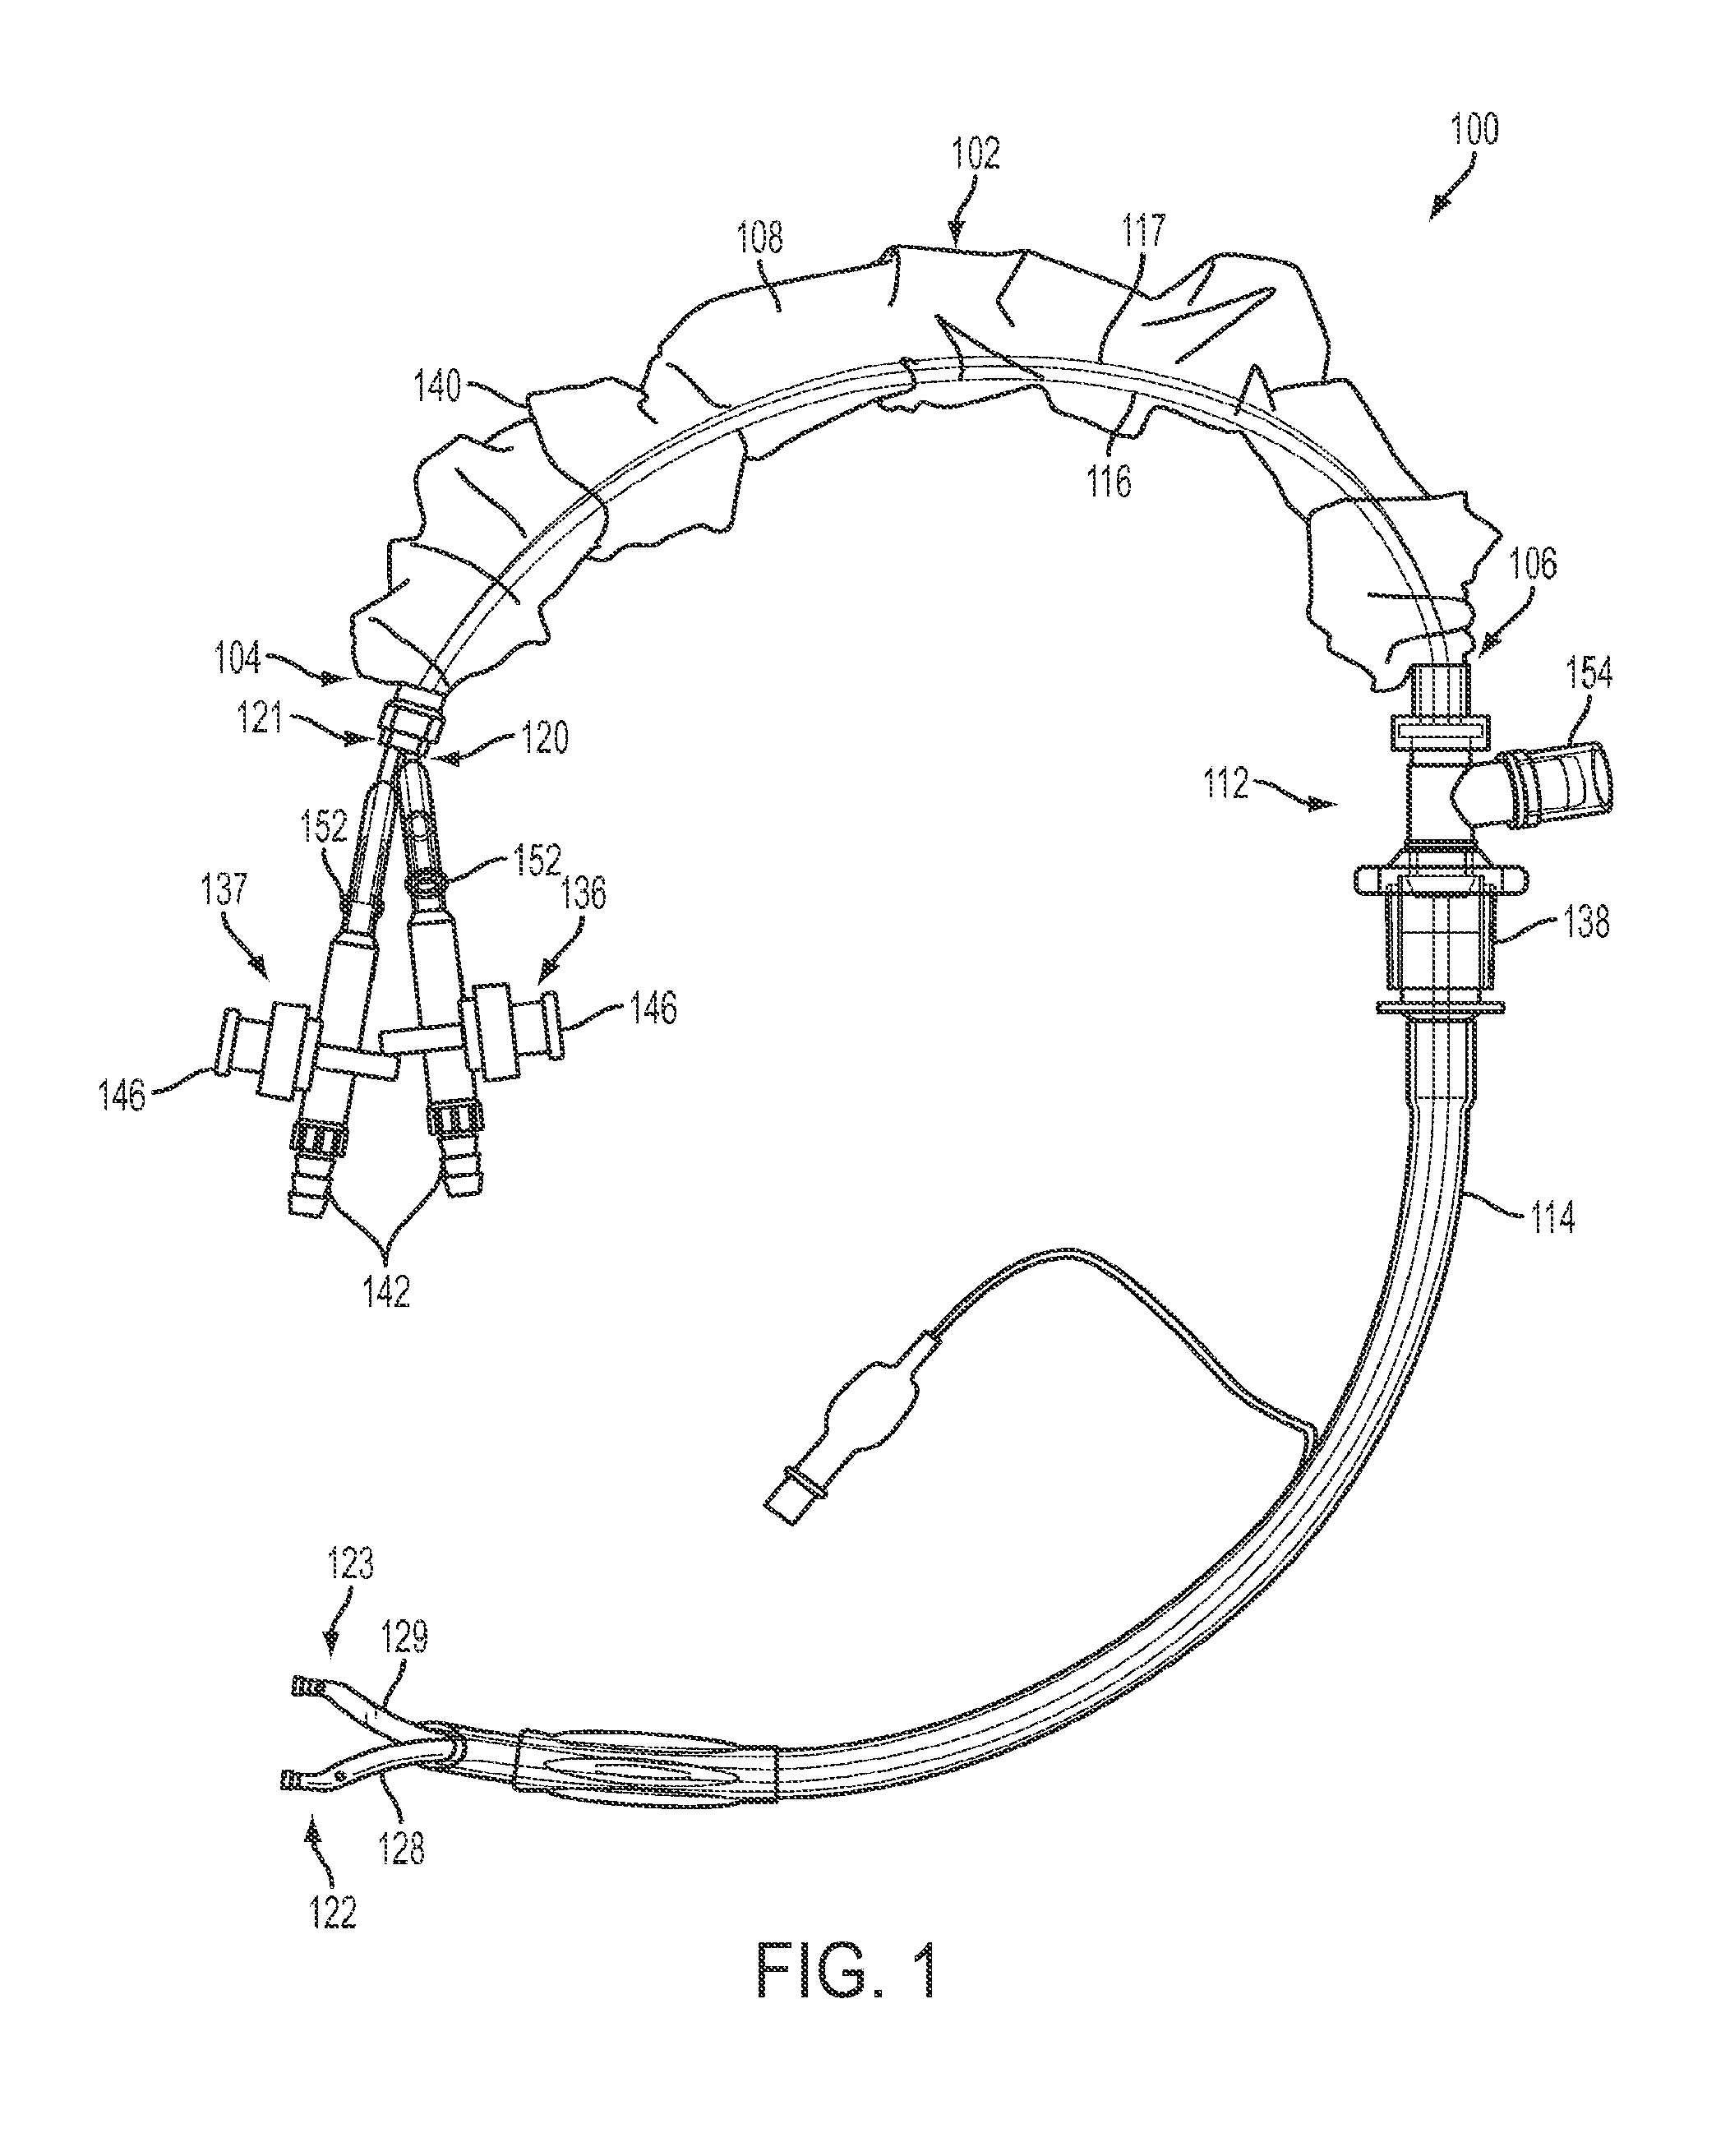 Aspiration catheters, systems, and methods